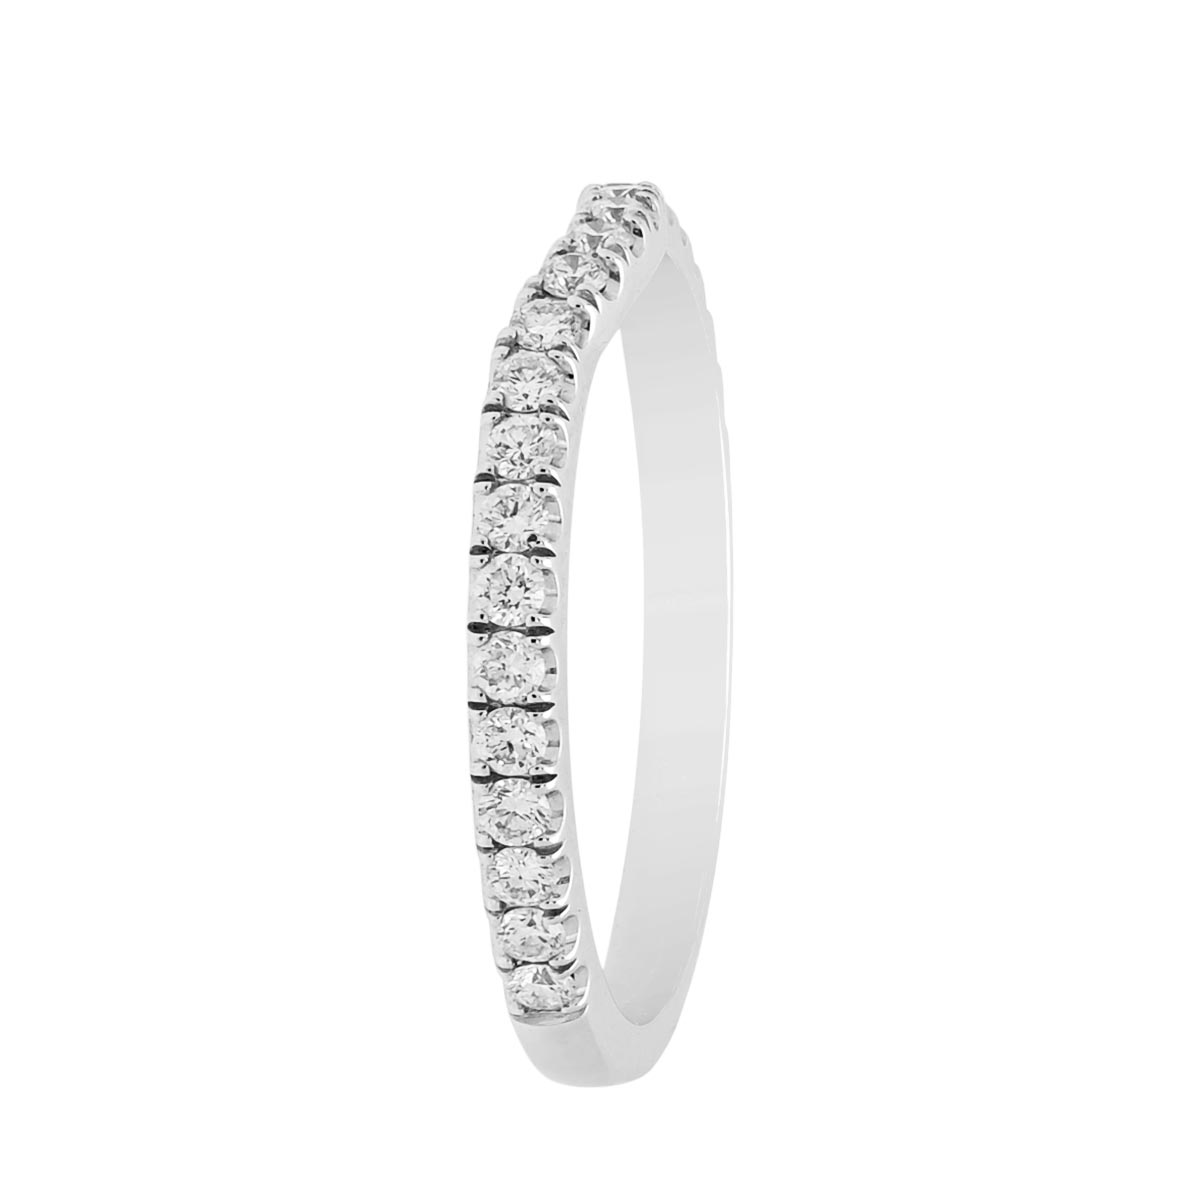 Michael M Diamond Curved Wedding Band in 18kt White Gold (1/3ct tw)